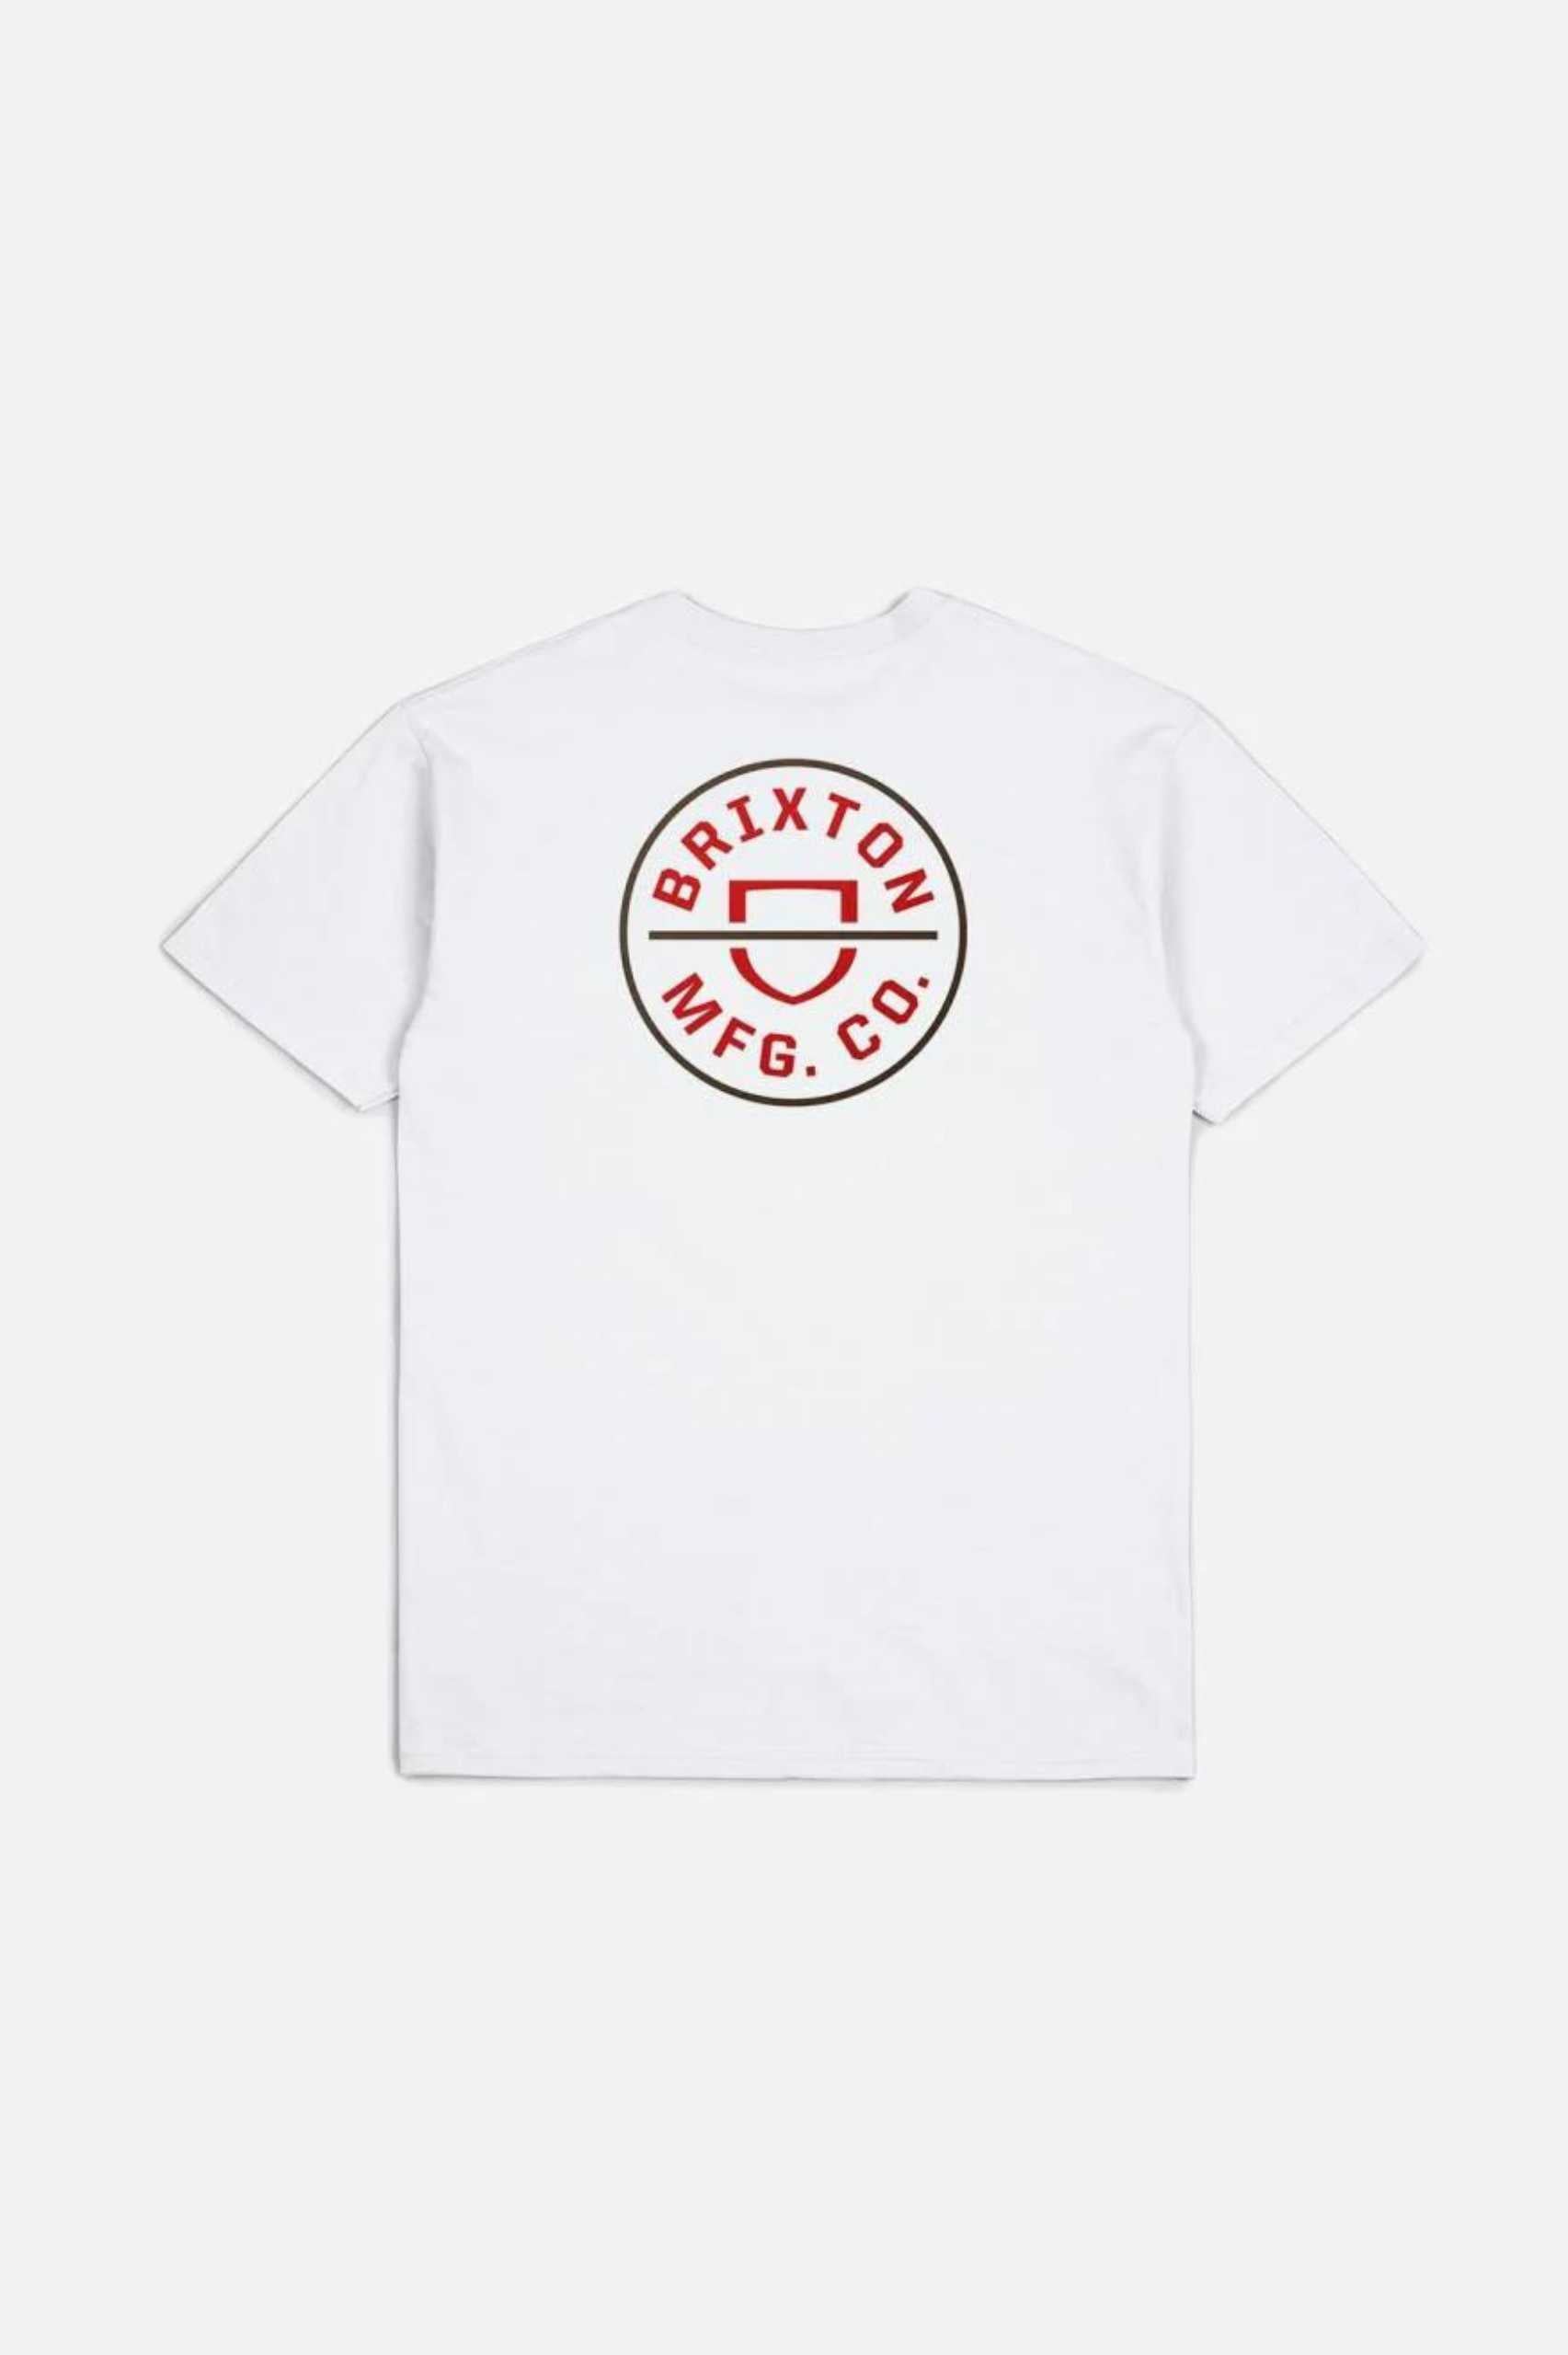 Brixton Mens Crest II S/S Standard Tee in White/Aloha Red